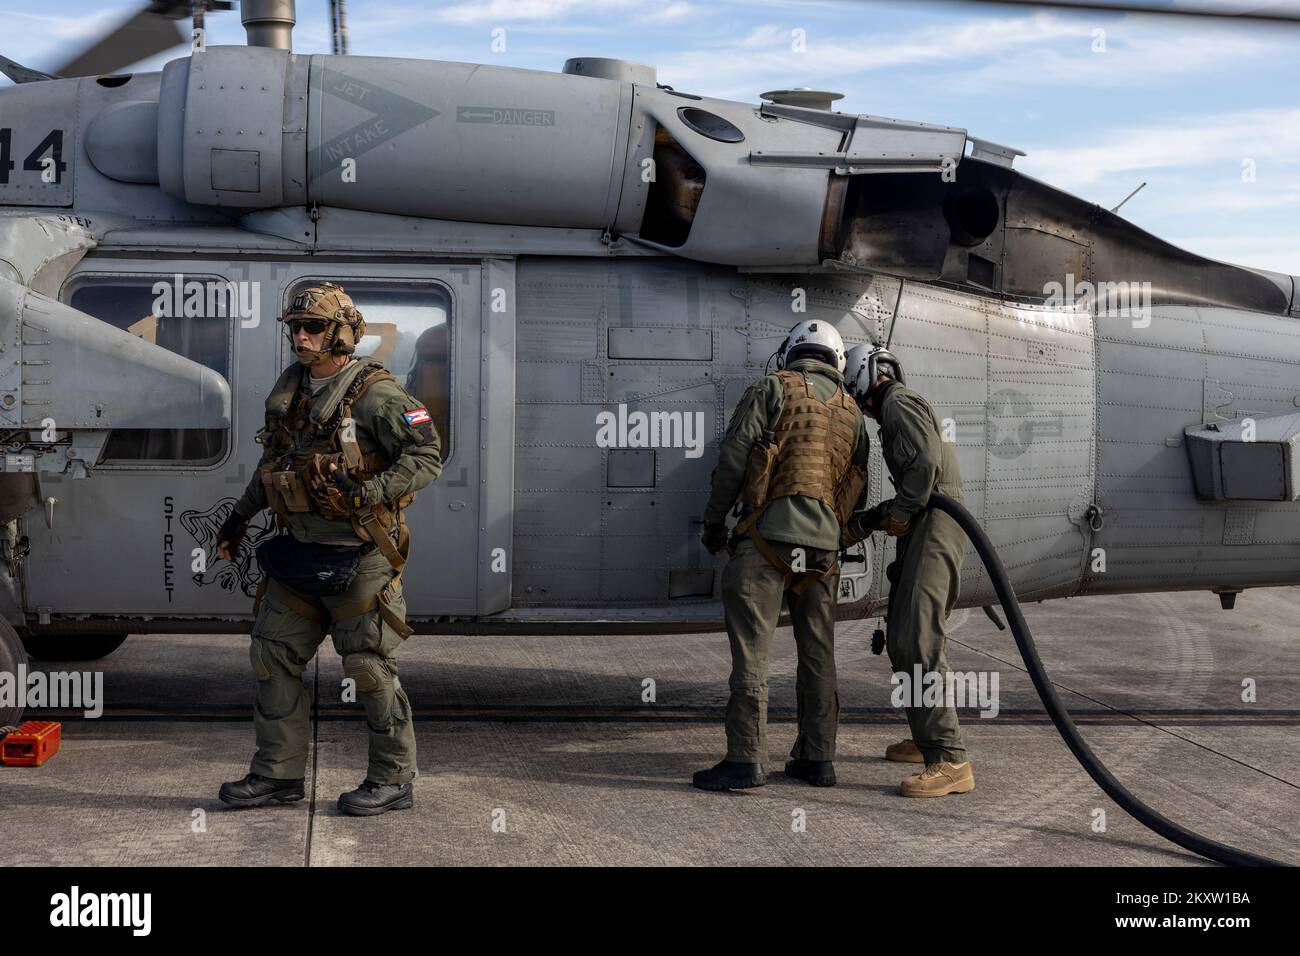 U.S. Marine Corps Cpl. Alexander Berg (right), a loadmaster with Marine Aerial Refueler Transport Squadron (VMGR) 252, and U.S. Sailors with Helicopter Sea Combat Squadron (HSC) 28 refuel a U.S. Navy MH-60S Seahawk via air-delivered ground refueling at Blackstone Army Airfield, Virginia, Nov. 16, 2022. VMGR-252 provided assault support to Naval Special Warfare Group 2 during Exercise Trident 23-2 to enhance combat readiness and improve naval integration. VMGR-252 is a subordinate unit of 2nd Marine Aircraft Wing, the aviation combat element of II Marine Expeditionary Force. (U.S. Marine Corps Stock Photo